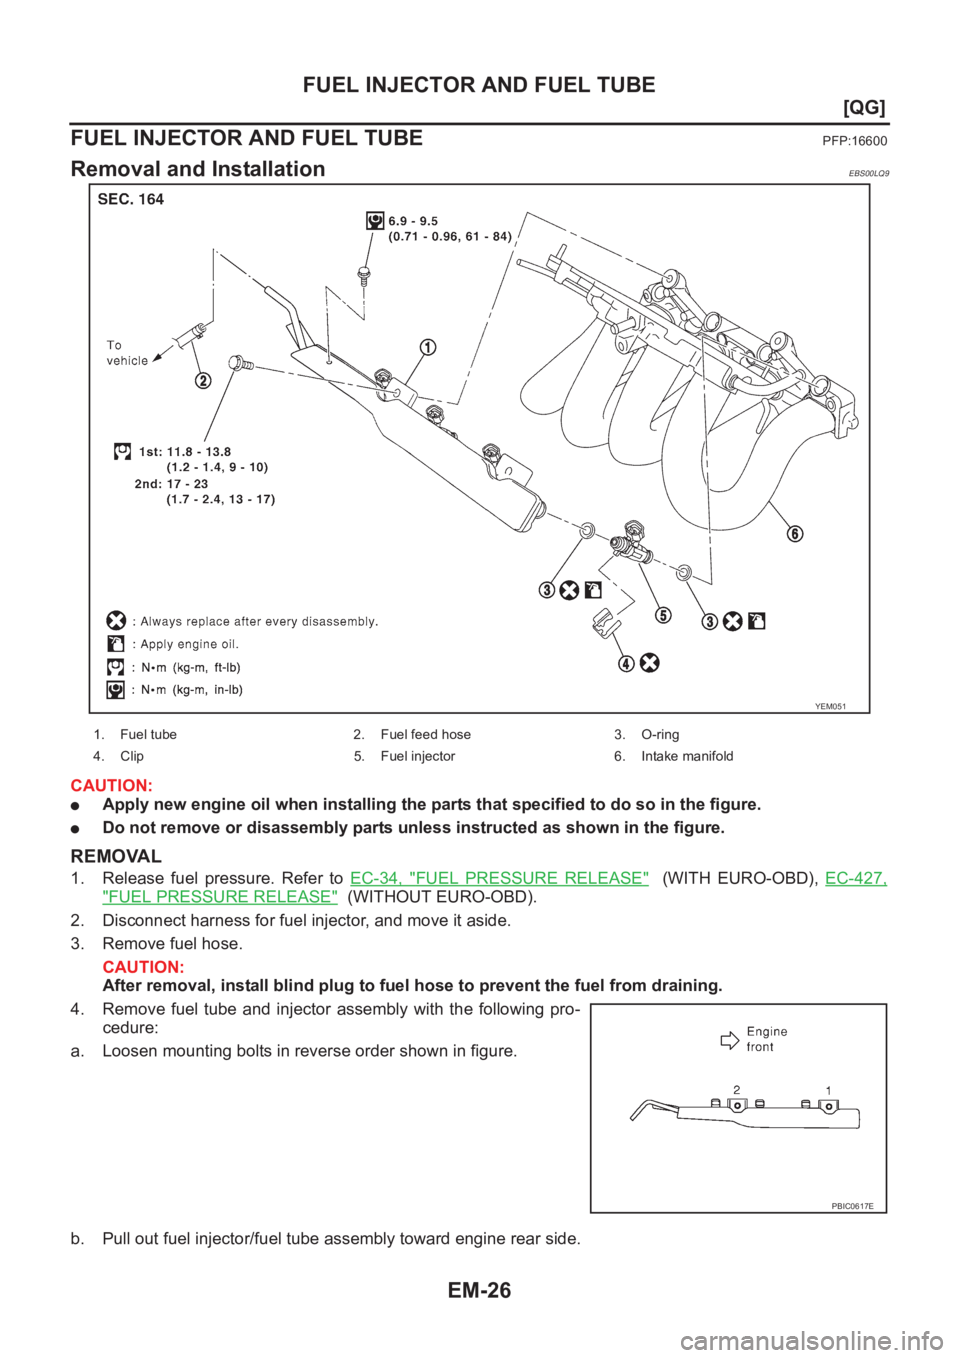 NISSAN ALMERA N16 2003  Electronic Repair Manual EM-26
[QG]
FUEL INJECTOR AND FUEL TUBE
FUEL INJECTOR AND FUEL TUBE
PFP:16600
Removal and InstallationEBS00LQ9
CAUTION:
●Apply new engine oil when installing the parts that specified to do so in the 